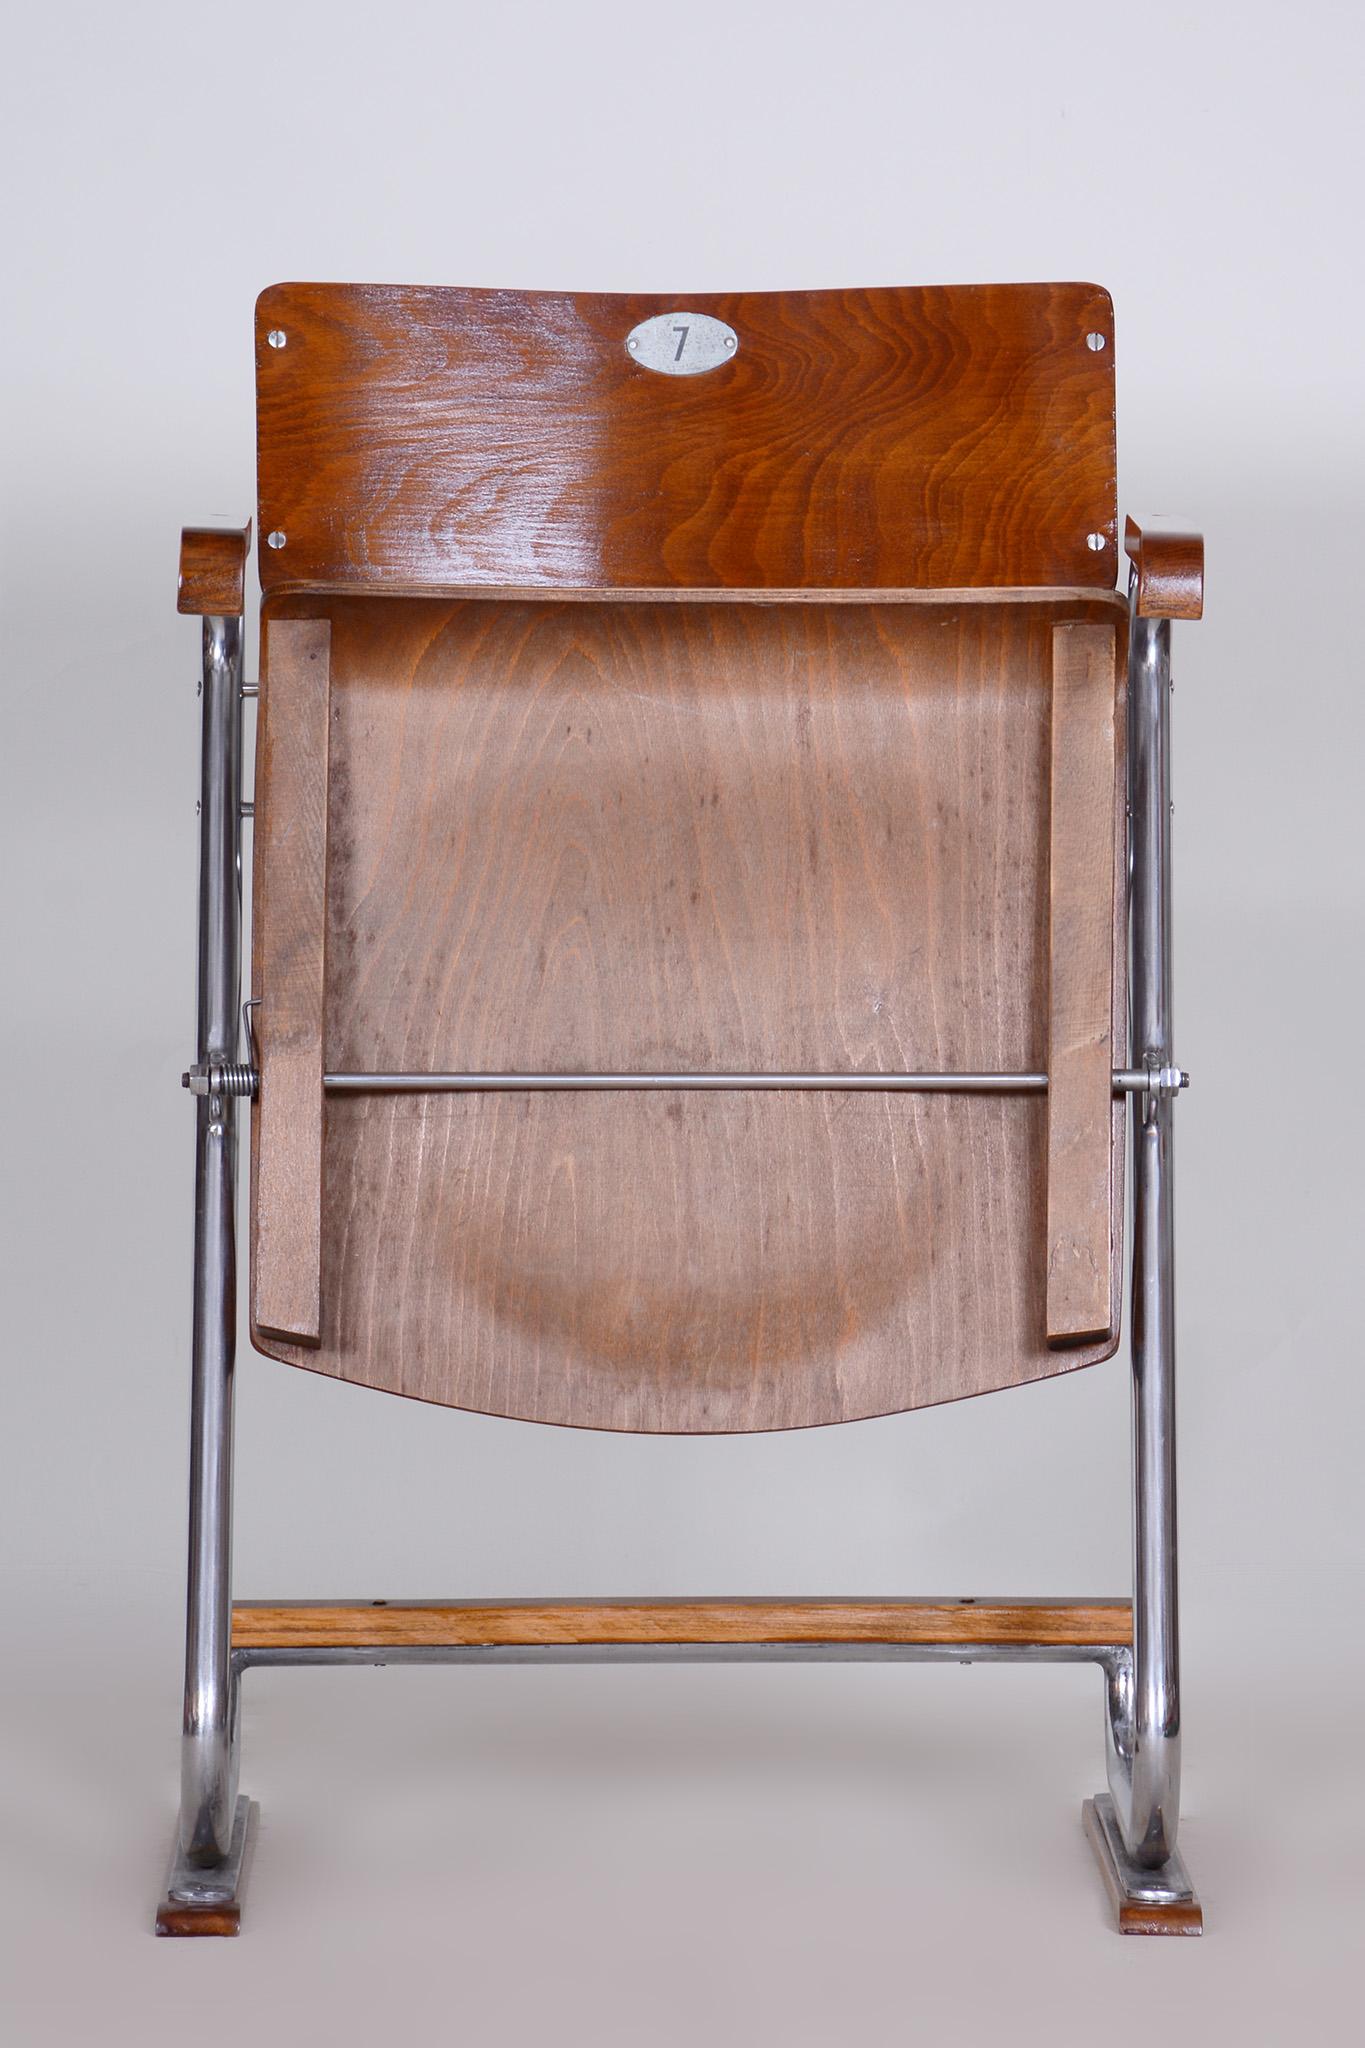 Restored Bauhaus Folding Chair.

Style: Bauhaus
Period: 1930-1939
Source: Czechia
Seat height: 48 cm / 17.72?
Material: Beech Plywood, Chrome-plated Steel.

The chrome parts have been cleaned and professionally restored. 

This item